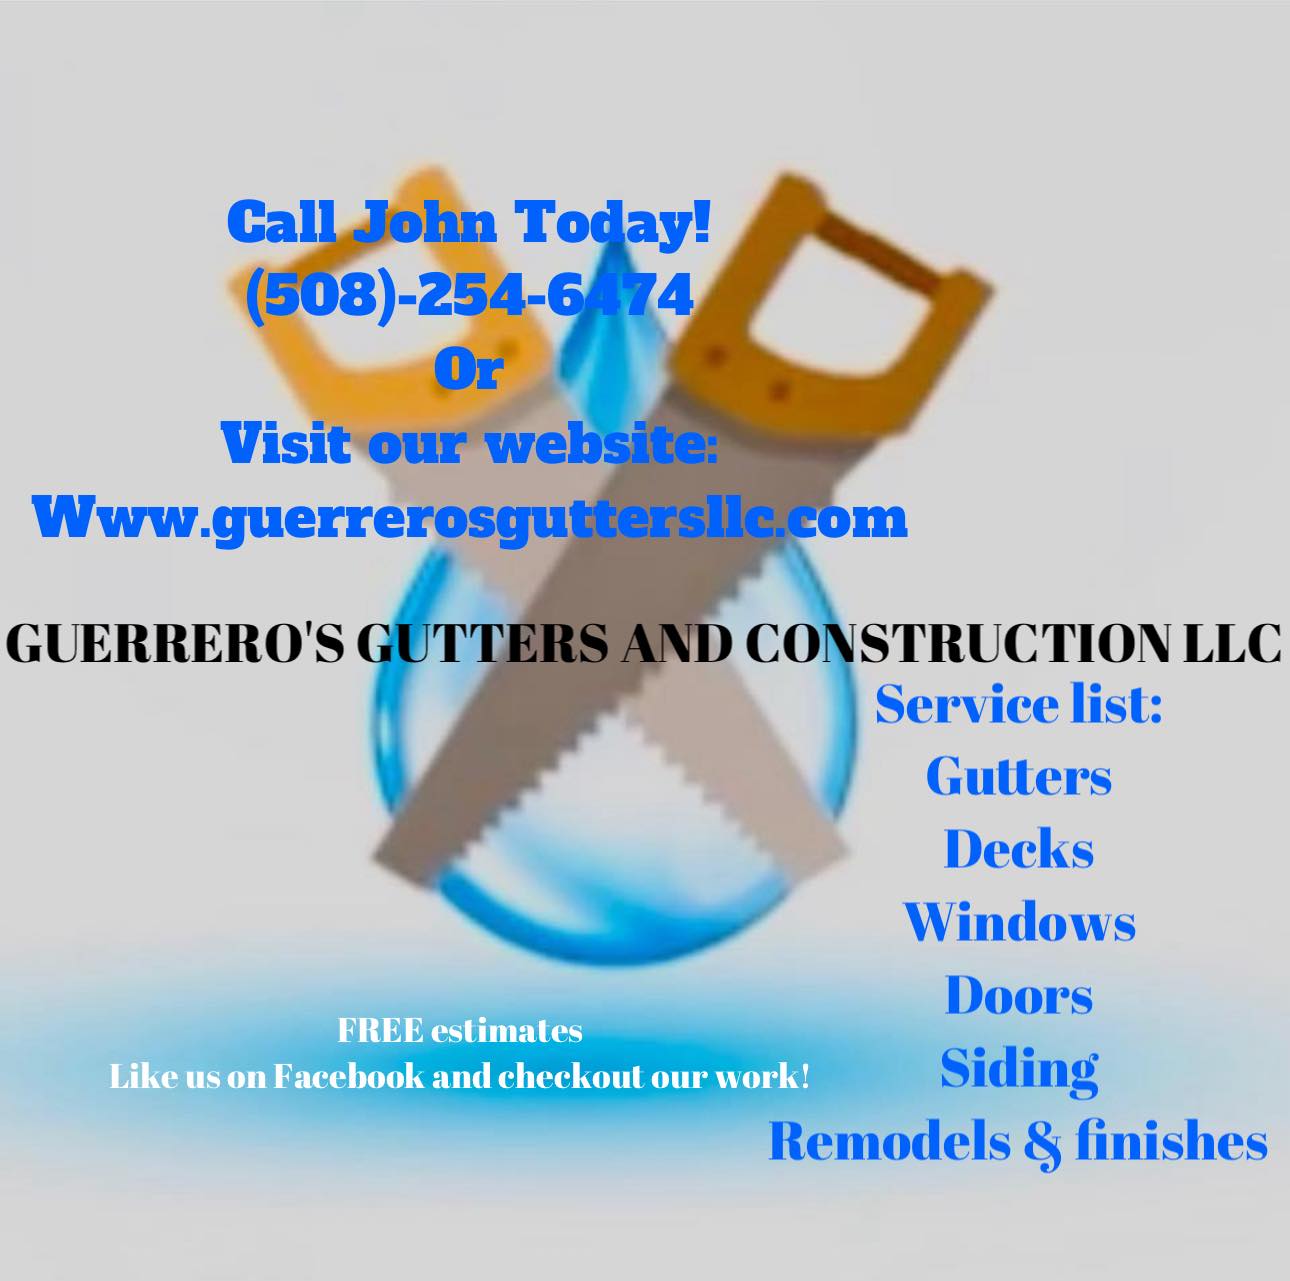 Guerreros Gutters and Construction llc Broad Acres Farm Rd, Medway Massachusetts 02053